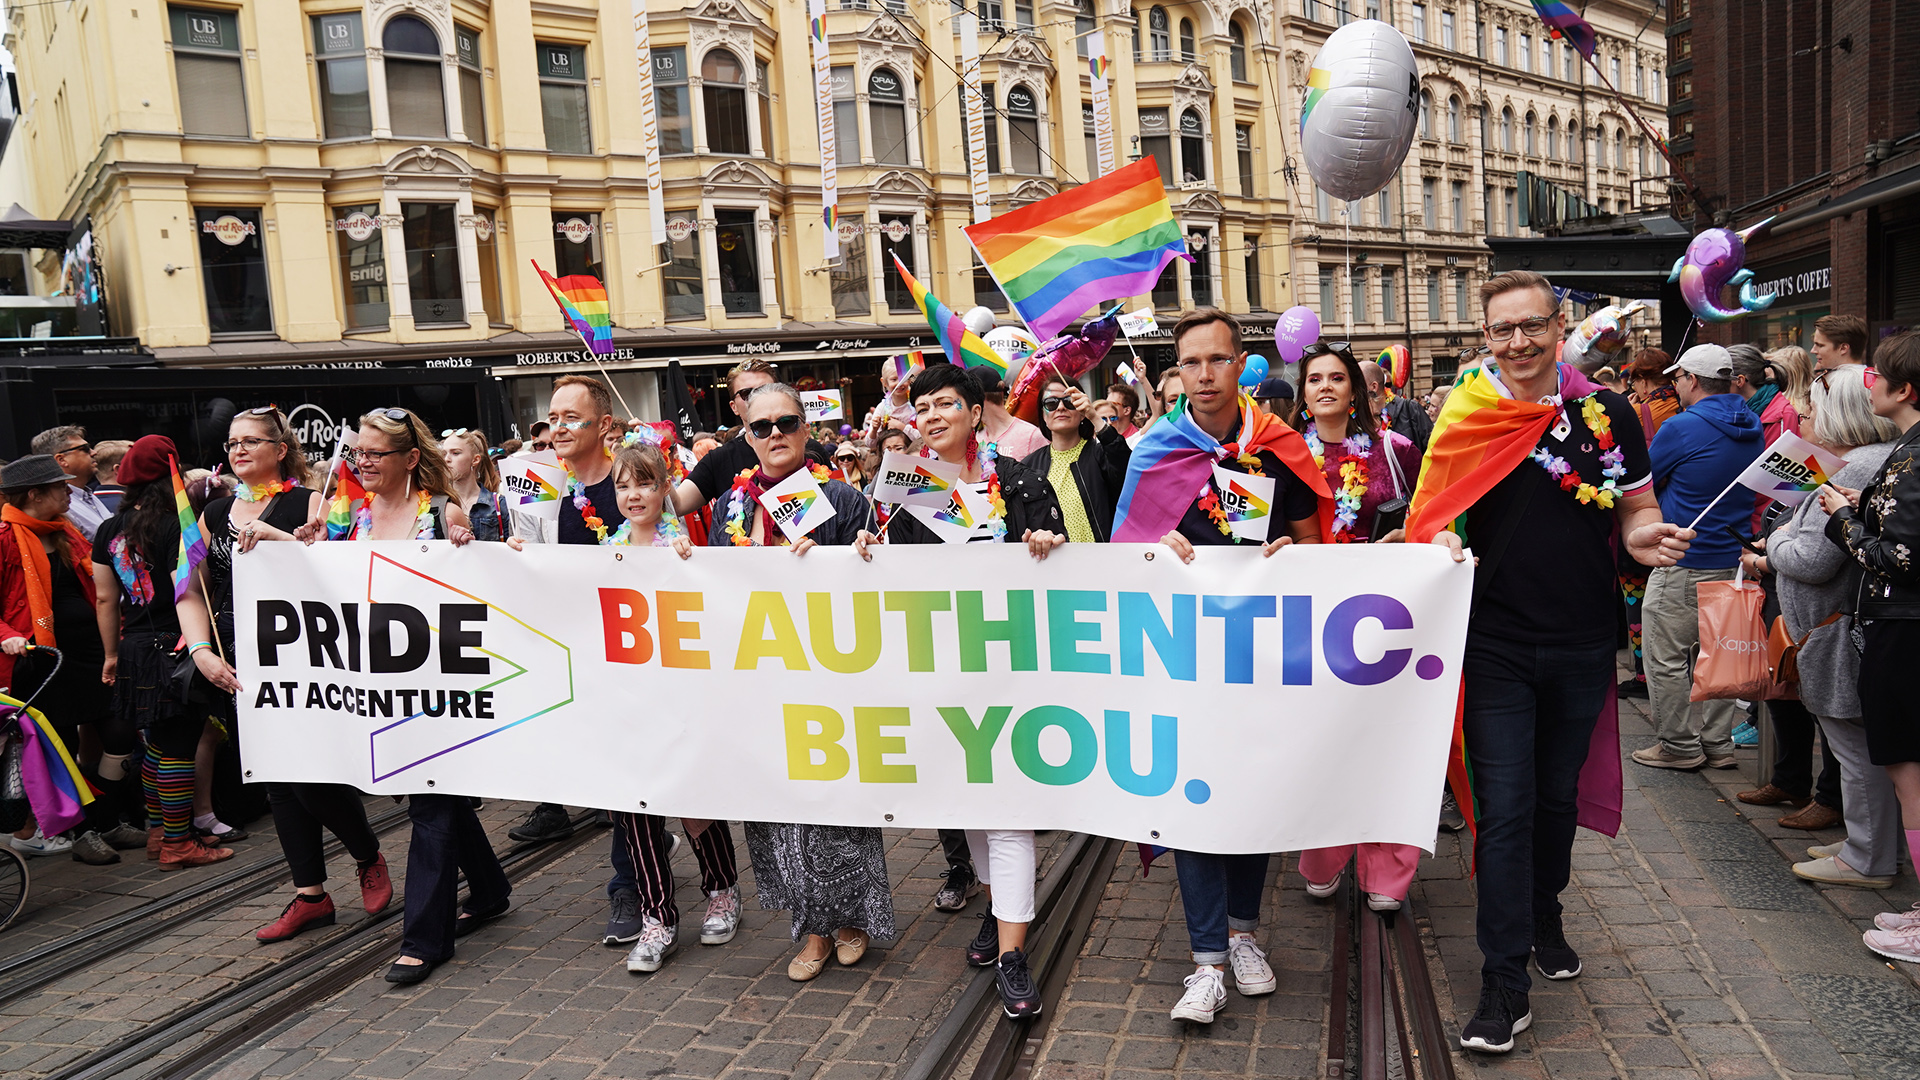 Helsinki Pride will continue as planned after the Oslo terrorist attack